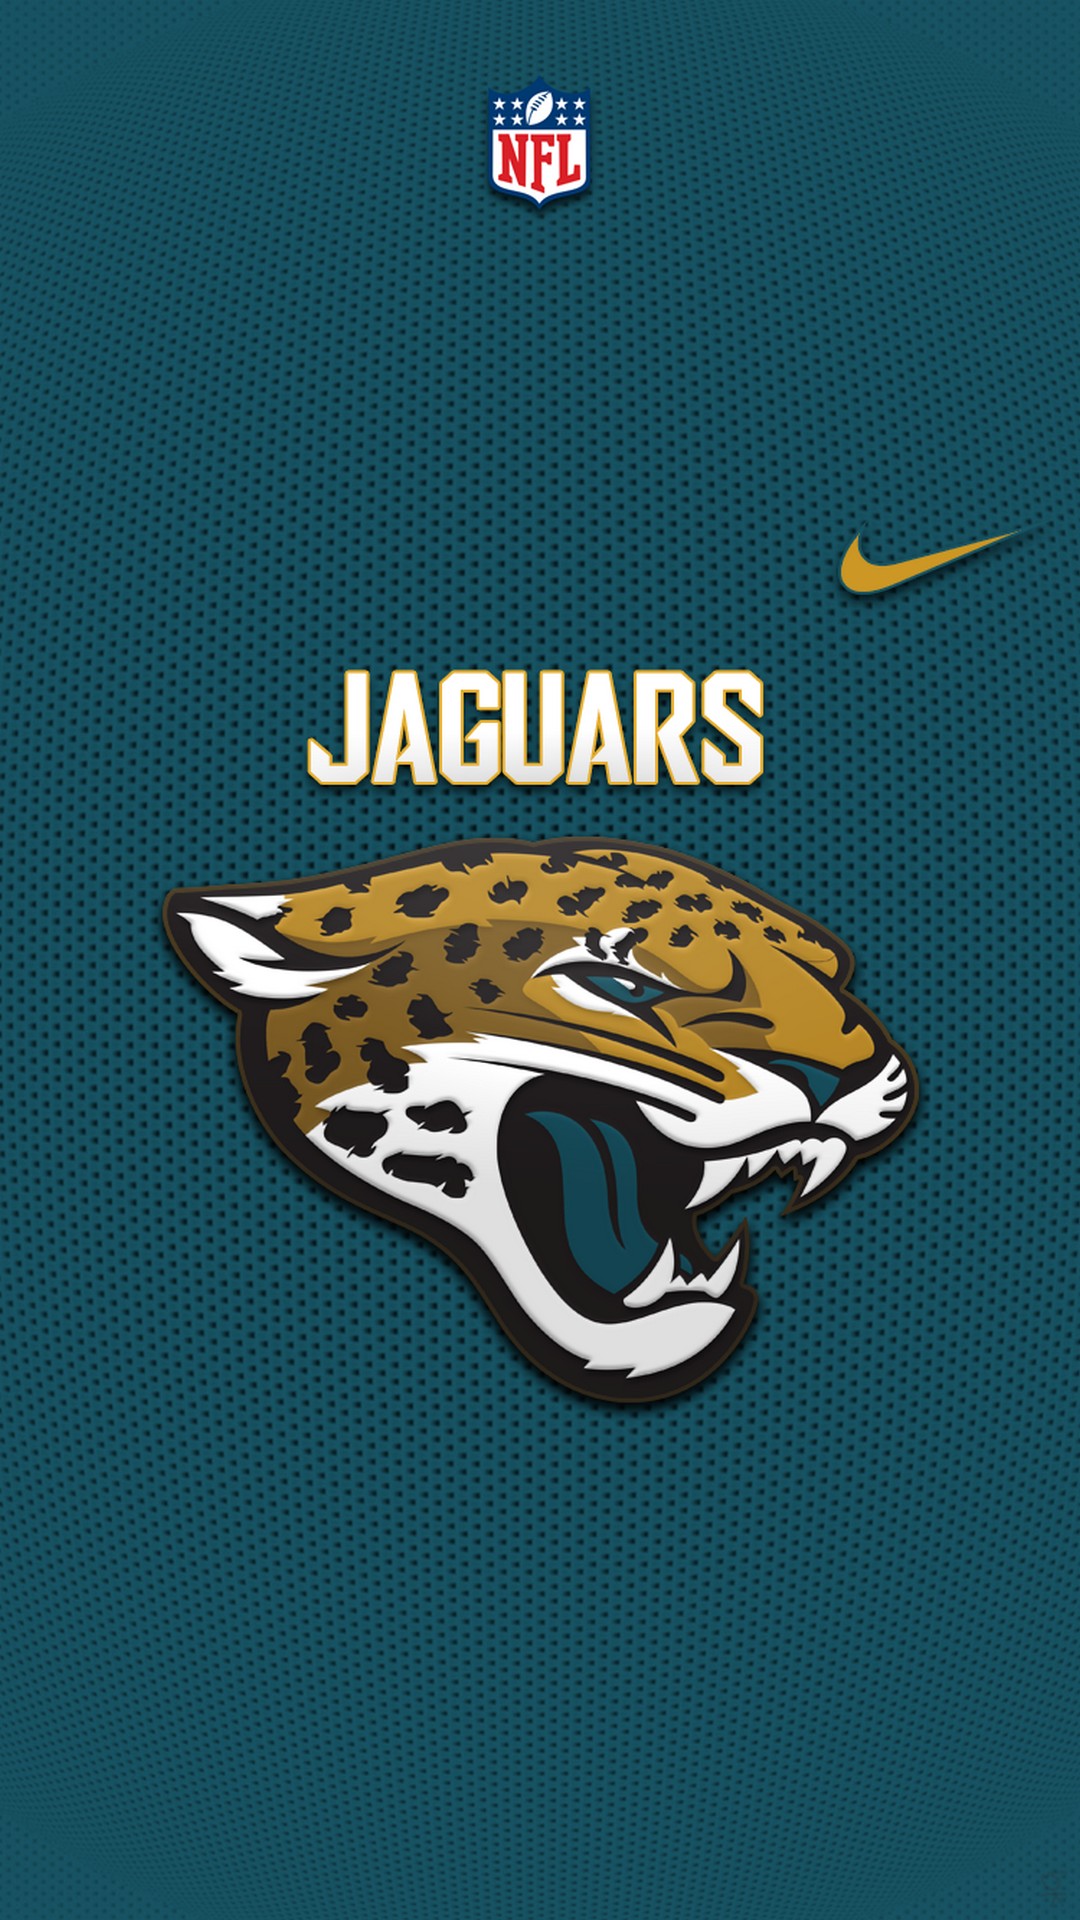 Jacksonville Jaguars iPhone Wallpaper Design With high-resolution 1080X1920 pixel. Download and set as wallpaper for Desktop Computer, Apple iPhone X, XS Max, XR, 8, 7, 6, SE, iPad, Android